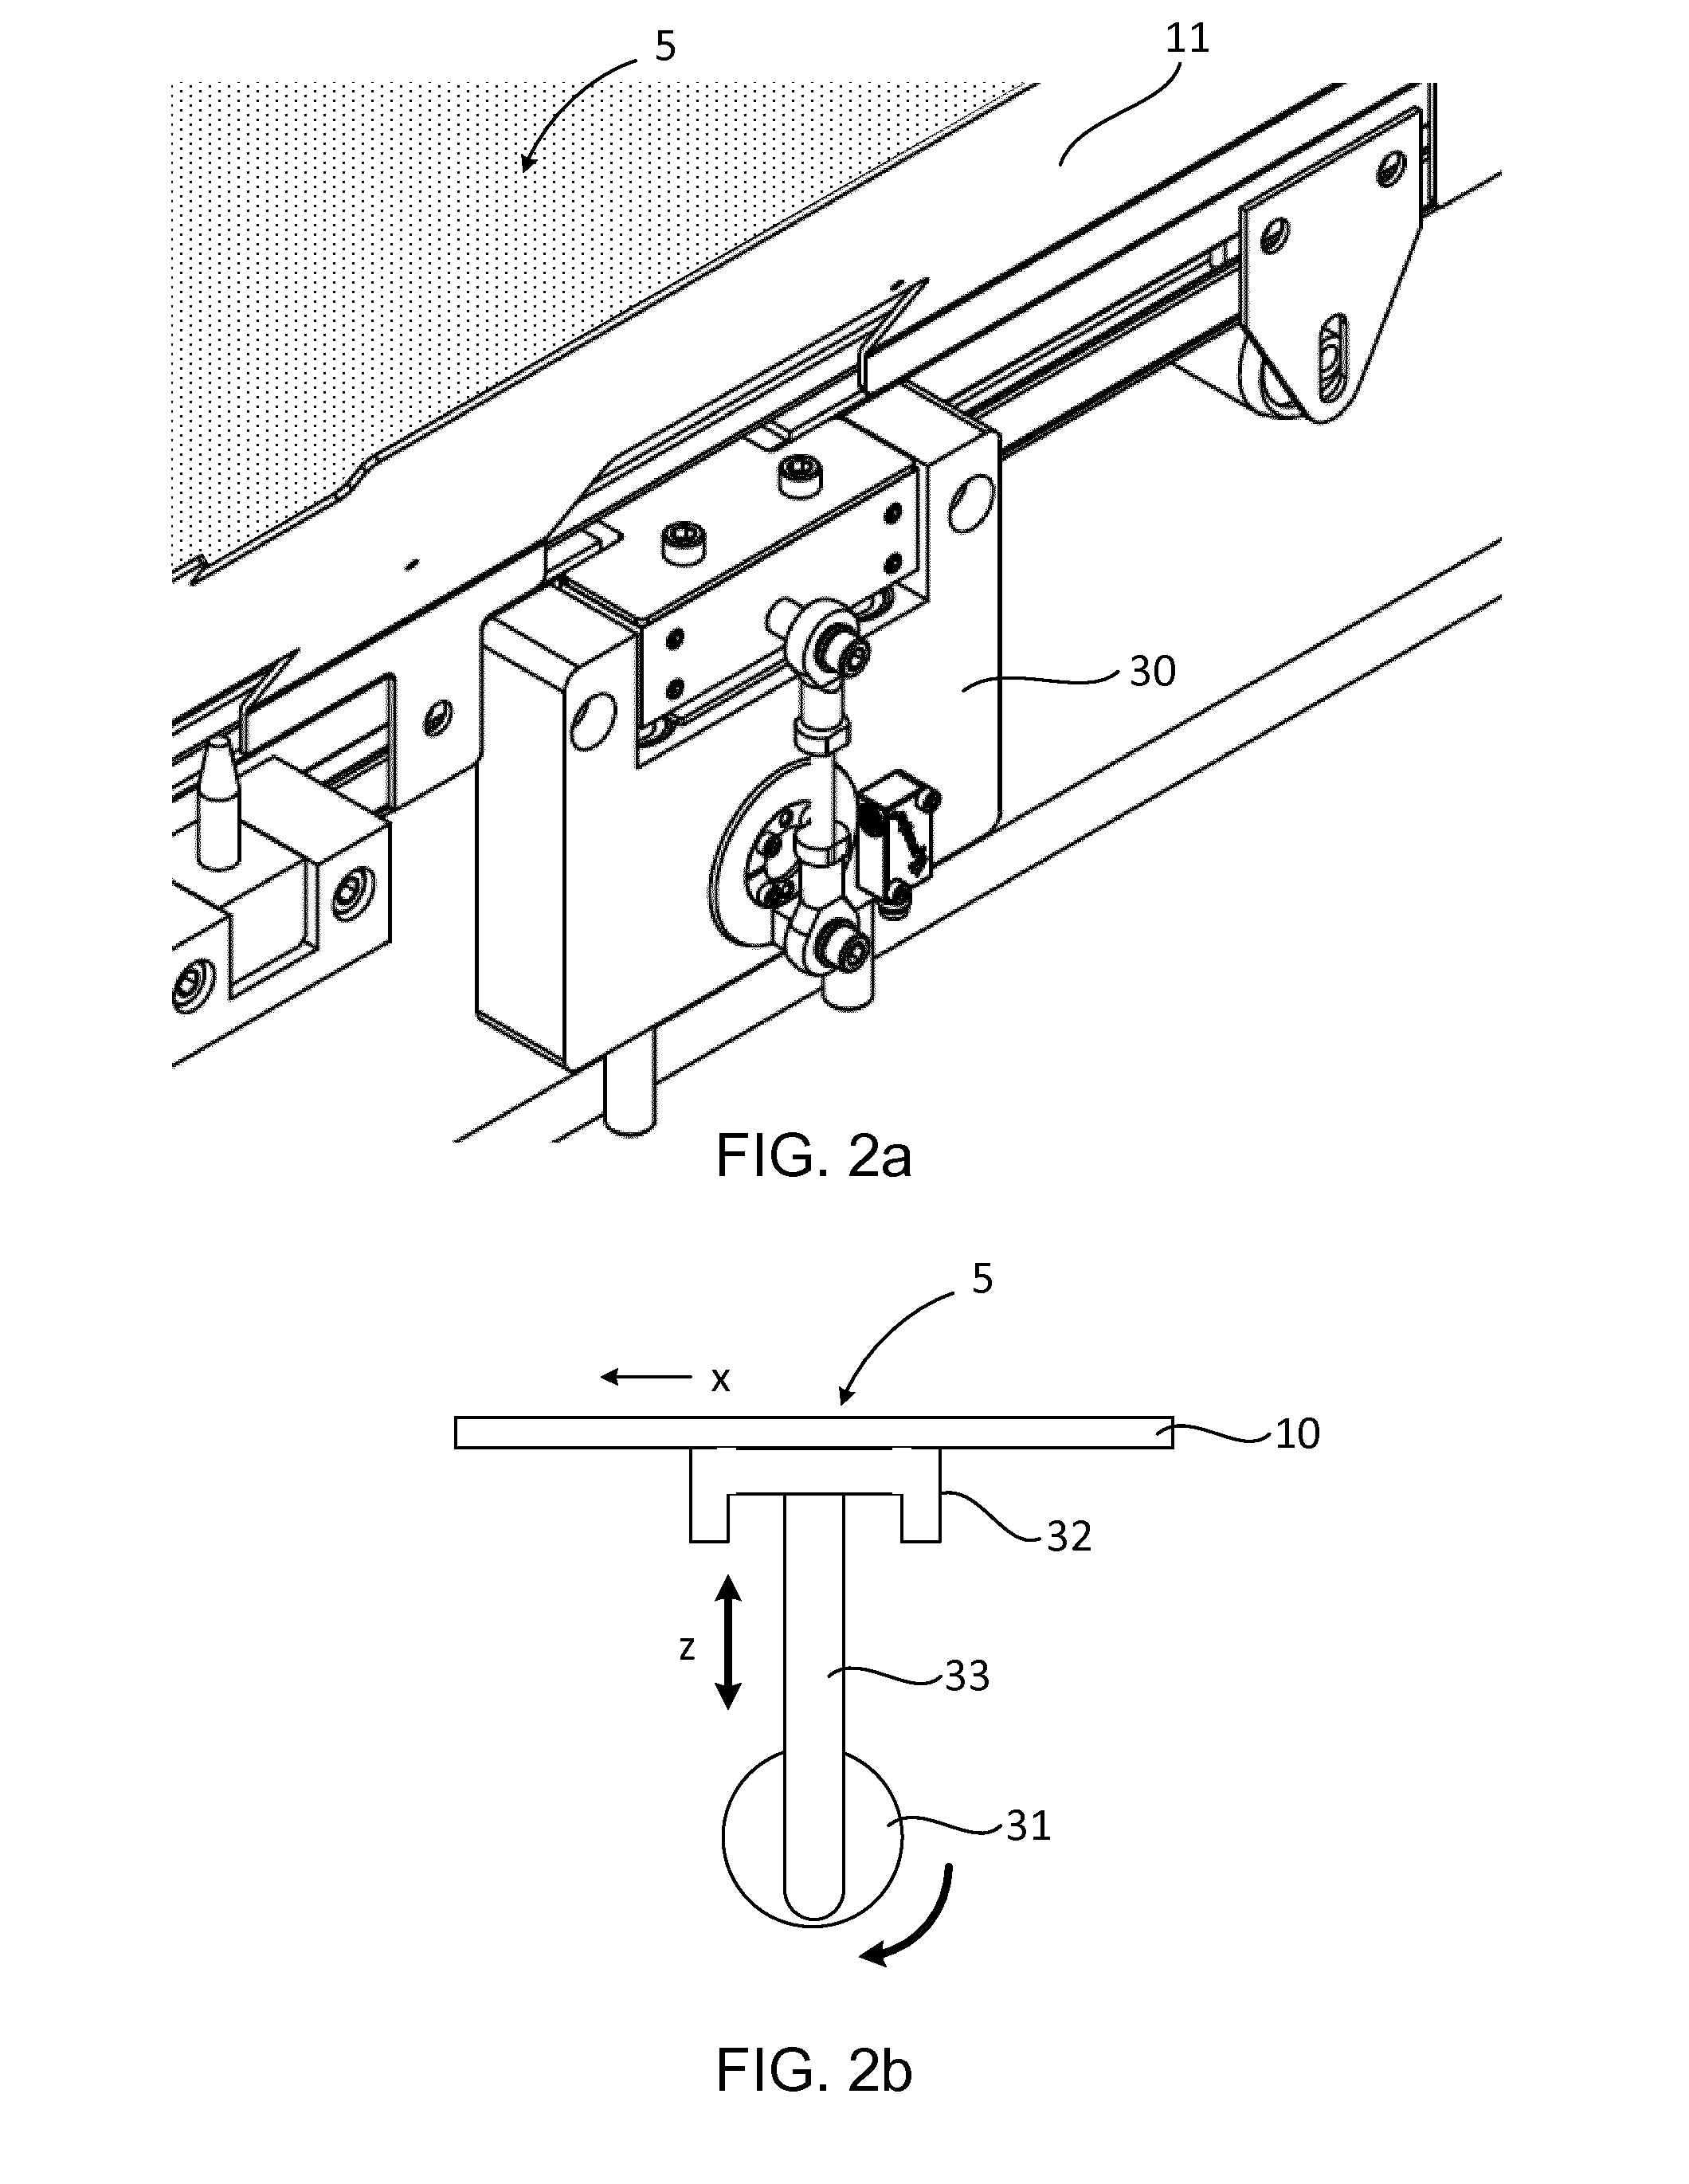 Apparatus and method for separating objects